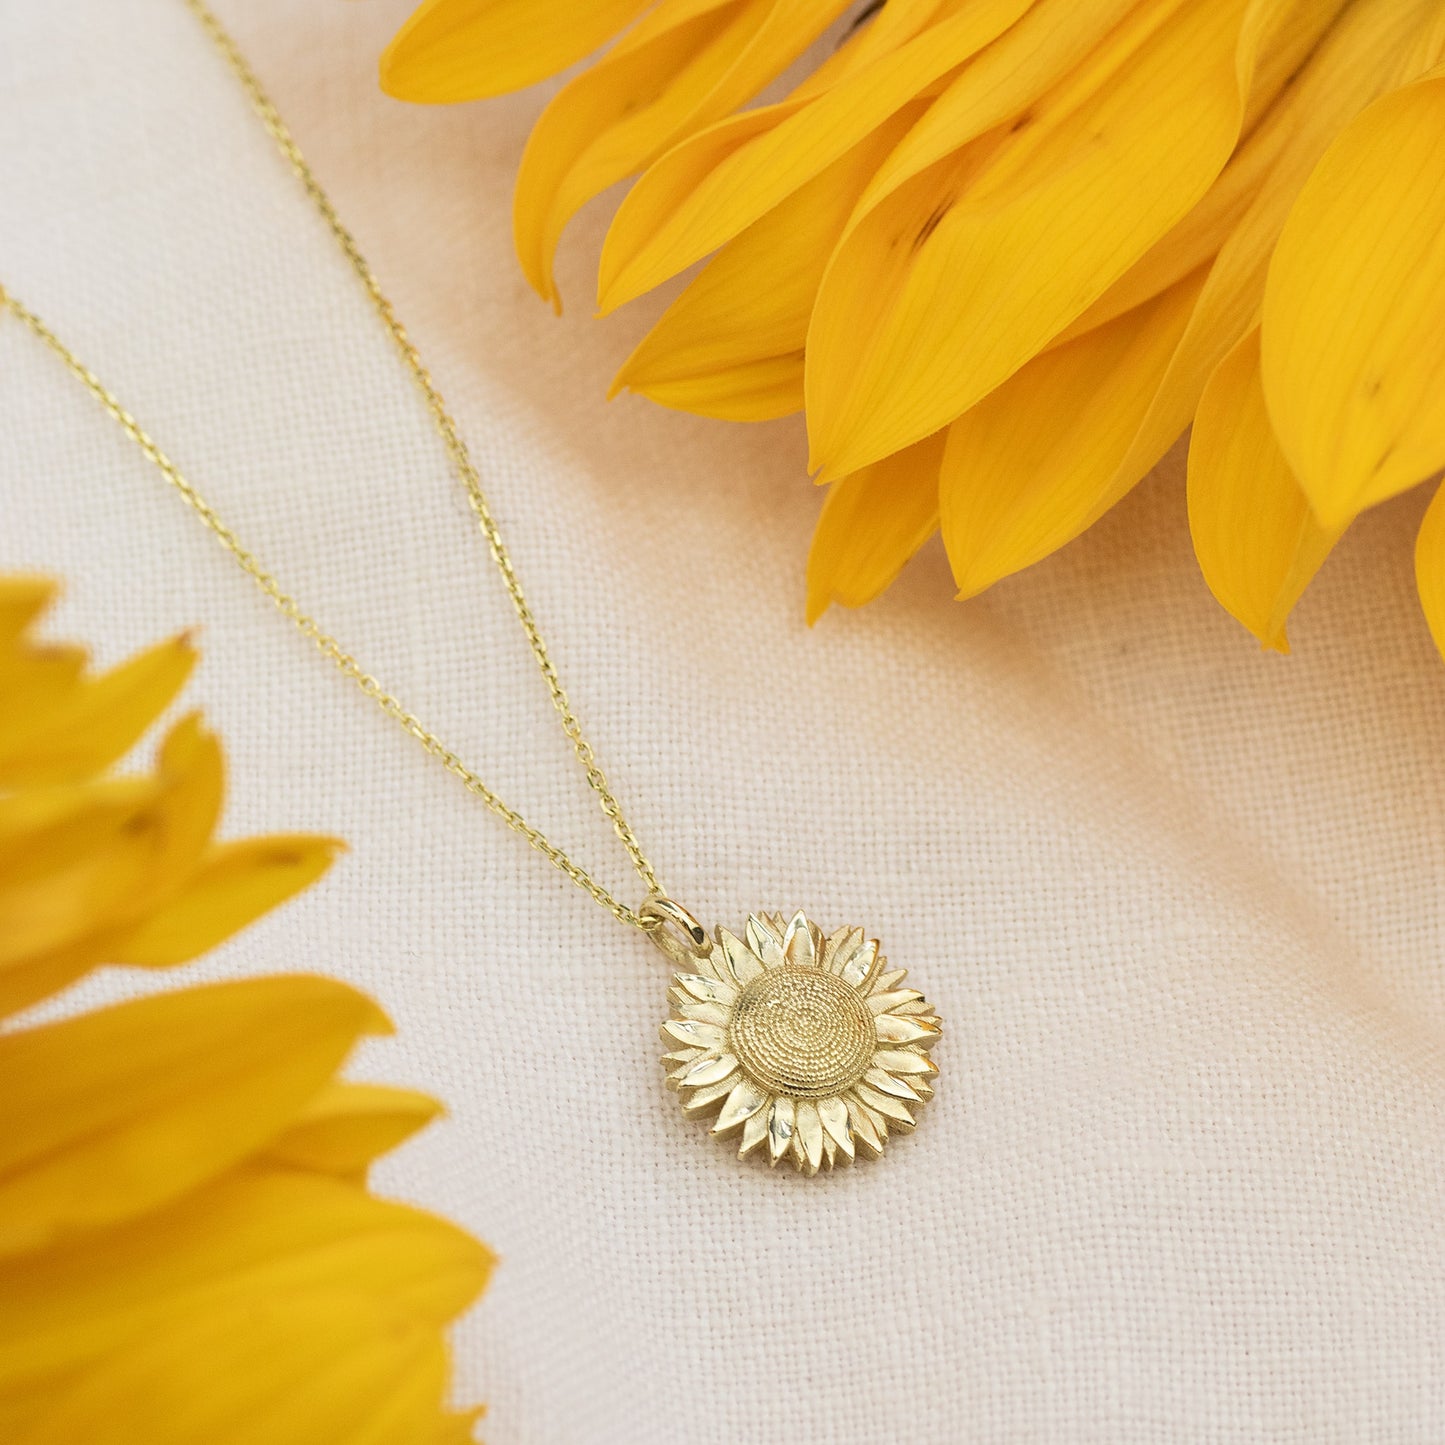 3rd Anniversary Gift - Sunflower Necklace - 9kt Gold